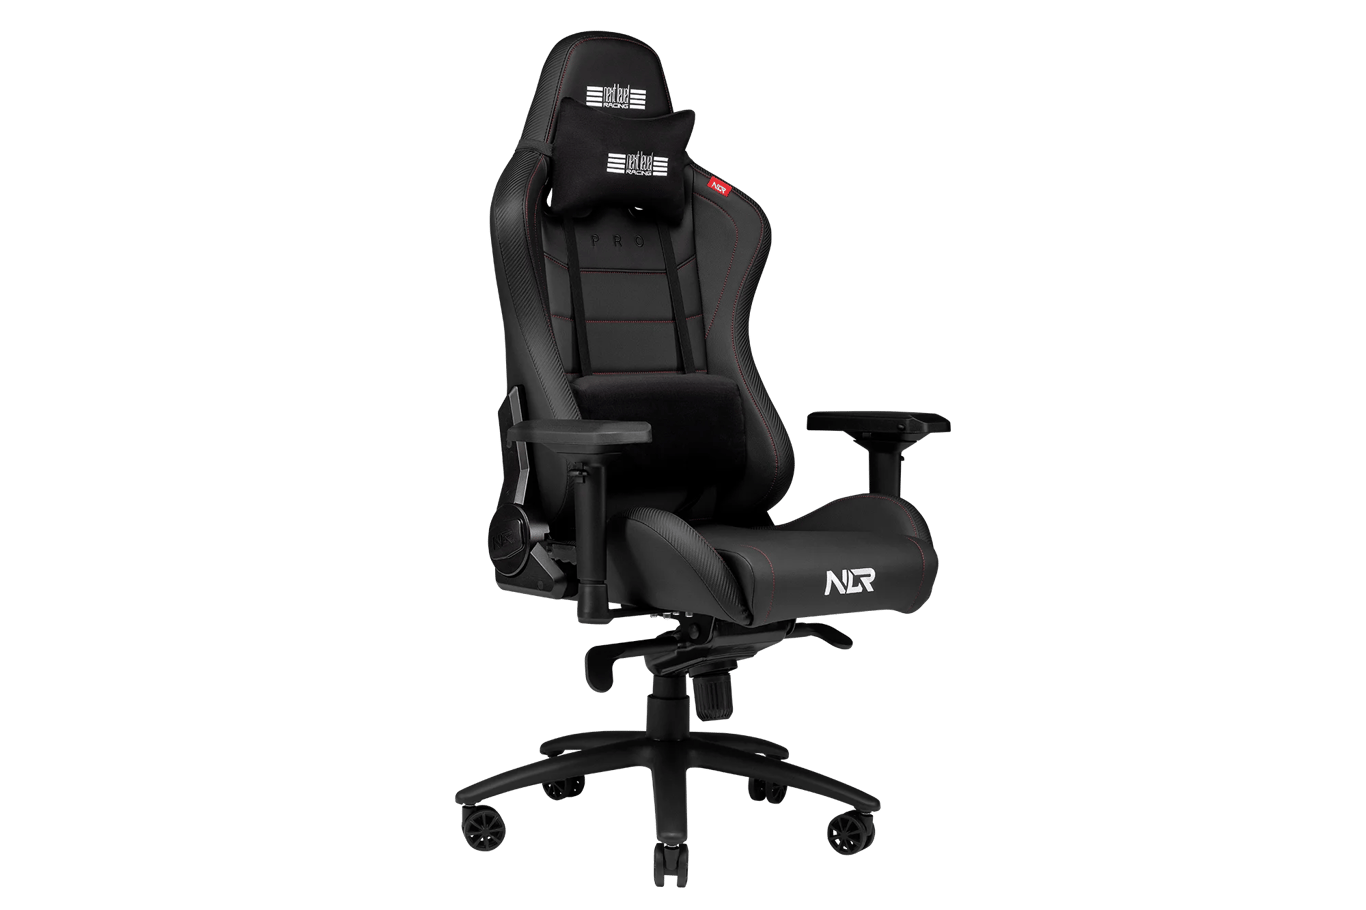 Next Level Racing Pro Gaming Chair 